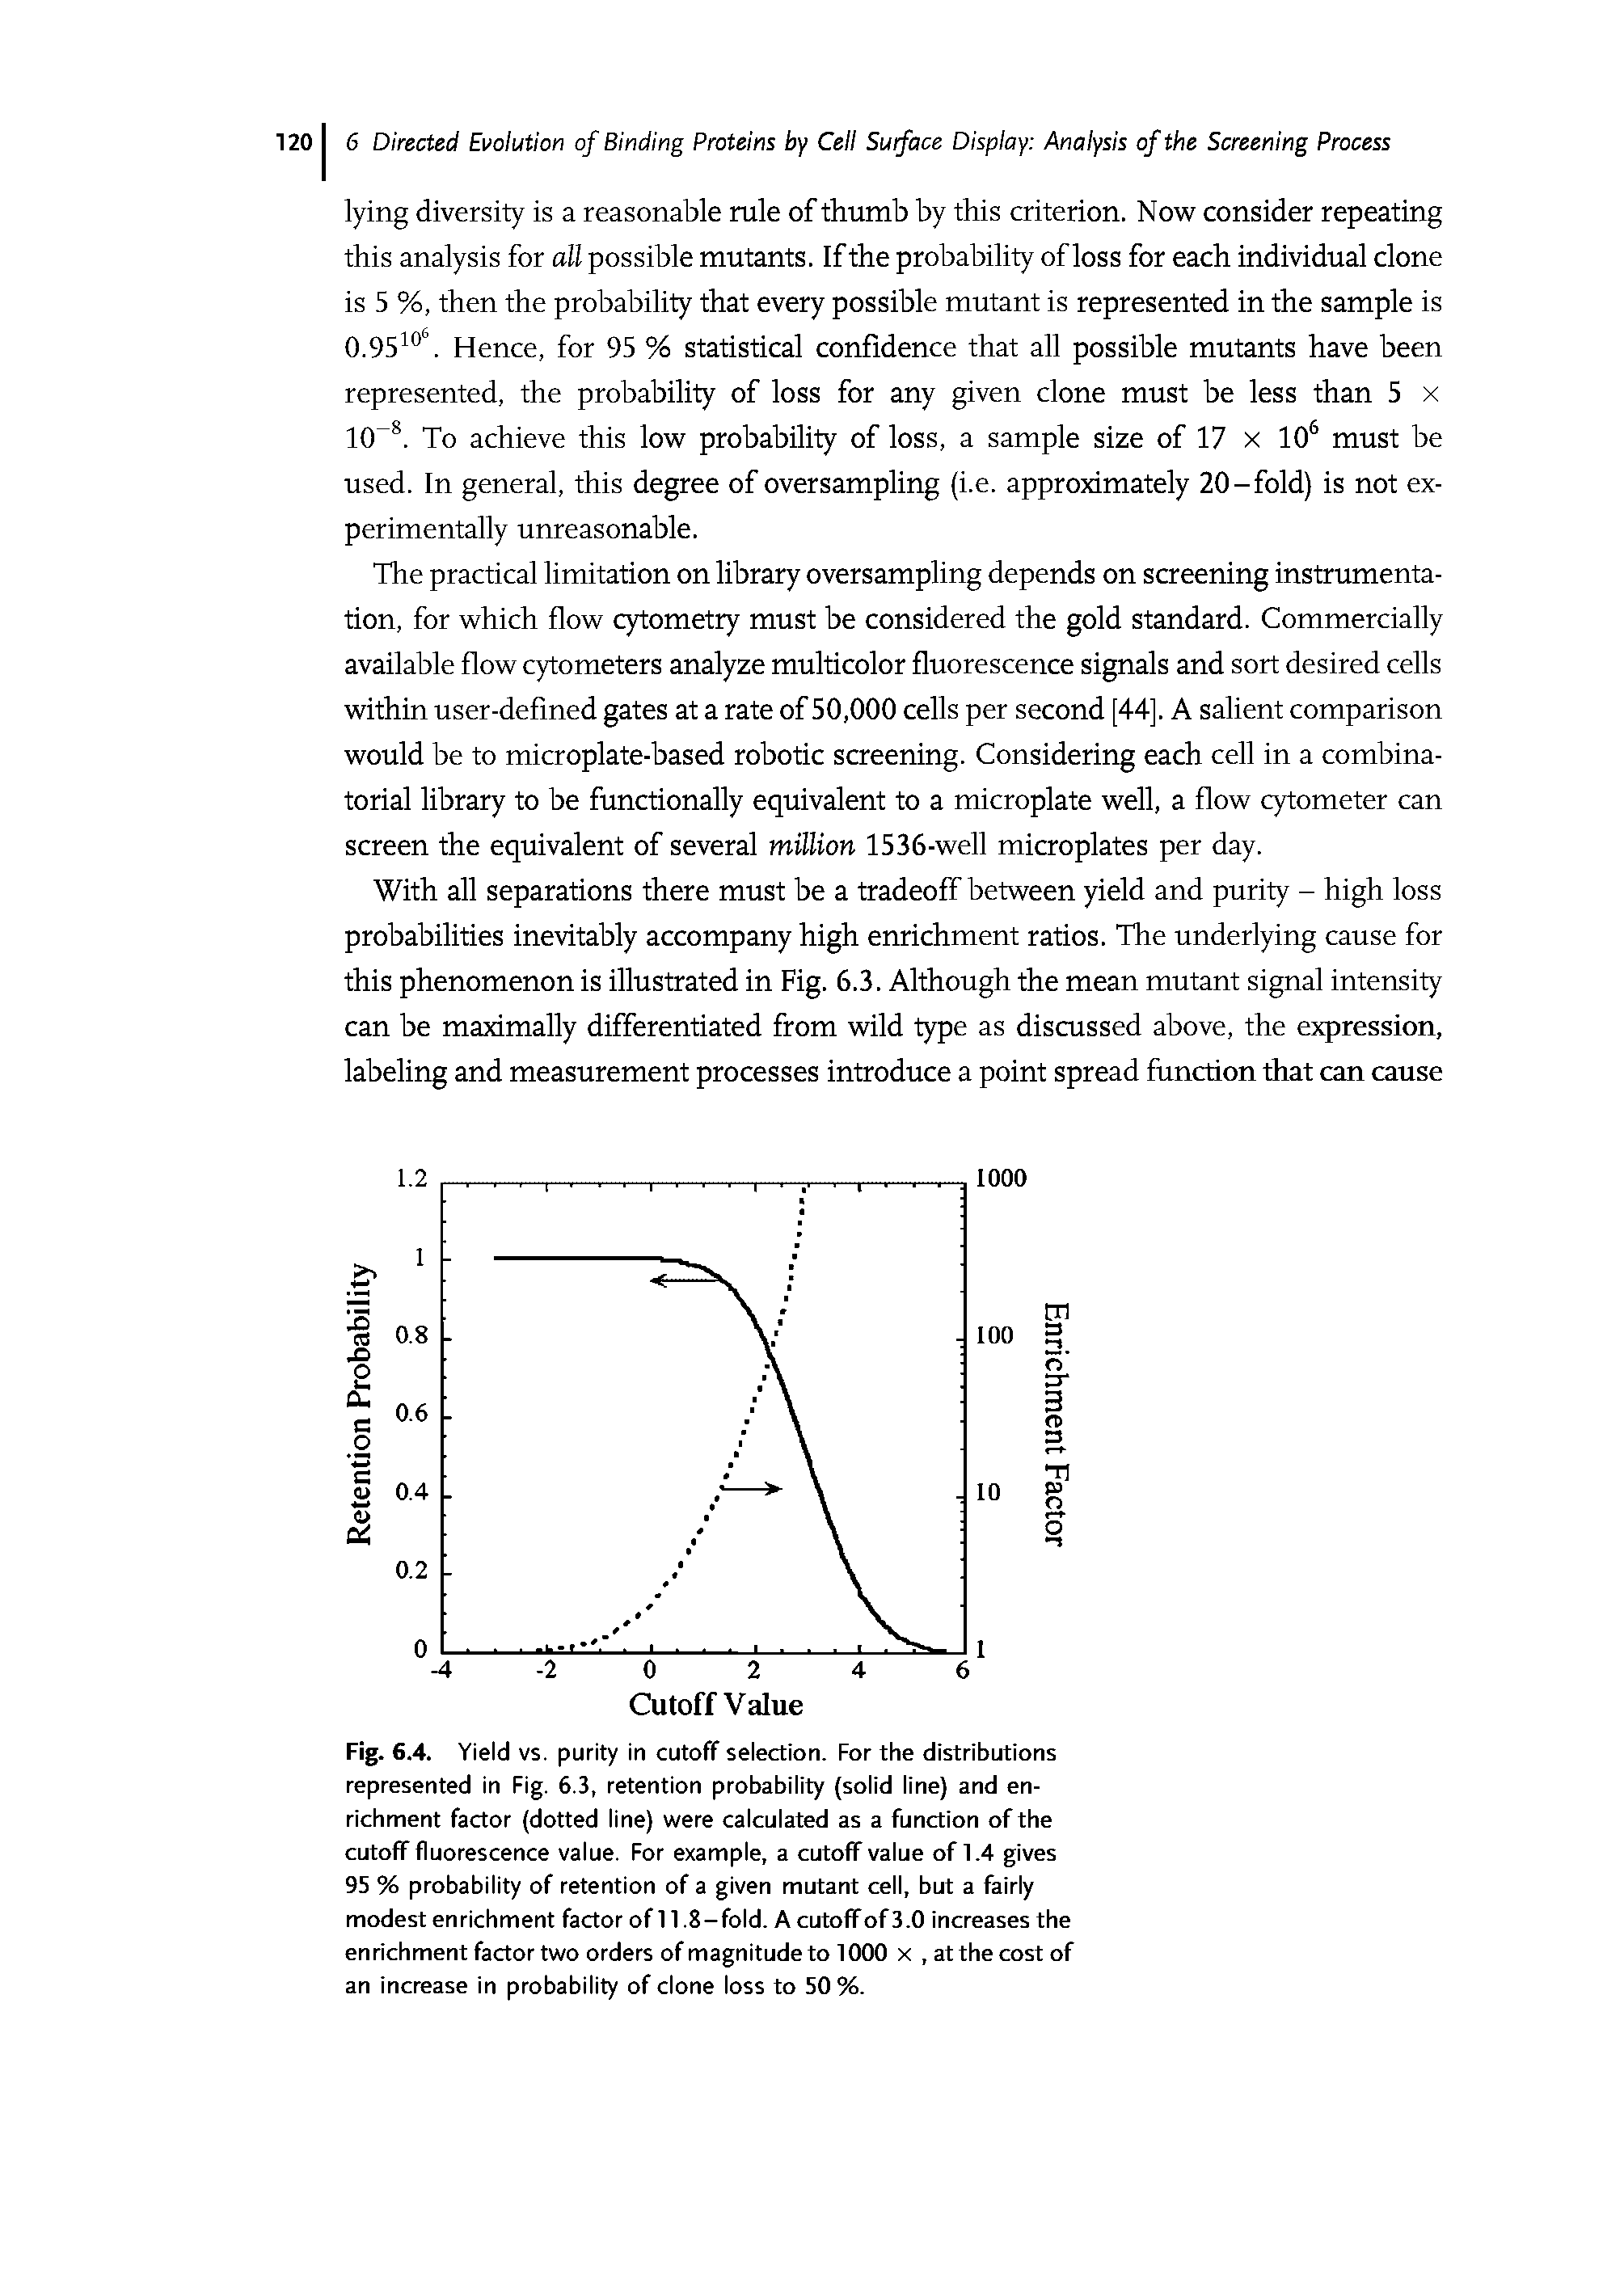 Fig. 6.4. Yield vs. purity in cutoff selection. For the distributions represented in Fig. 6.3, retention probability (solid line) and enrichment factor (dotted line) were calculated as a function of the cutoff fluorescence value. For example, a cutoff value of 1.4 gives 95 % probability of retention of a given mutant cell, but a fairly modest enrichment factor of 11.8-fold. A cutoffof 3.0 increases the enrichment factor two orders of magnitude to 1000 x, at the cost of an increase in probability of clone loss to 50%.